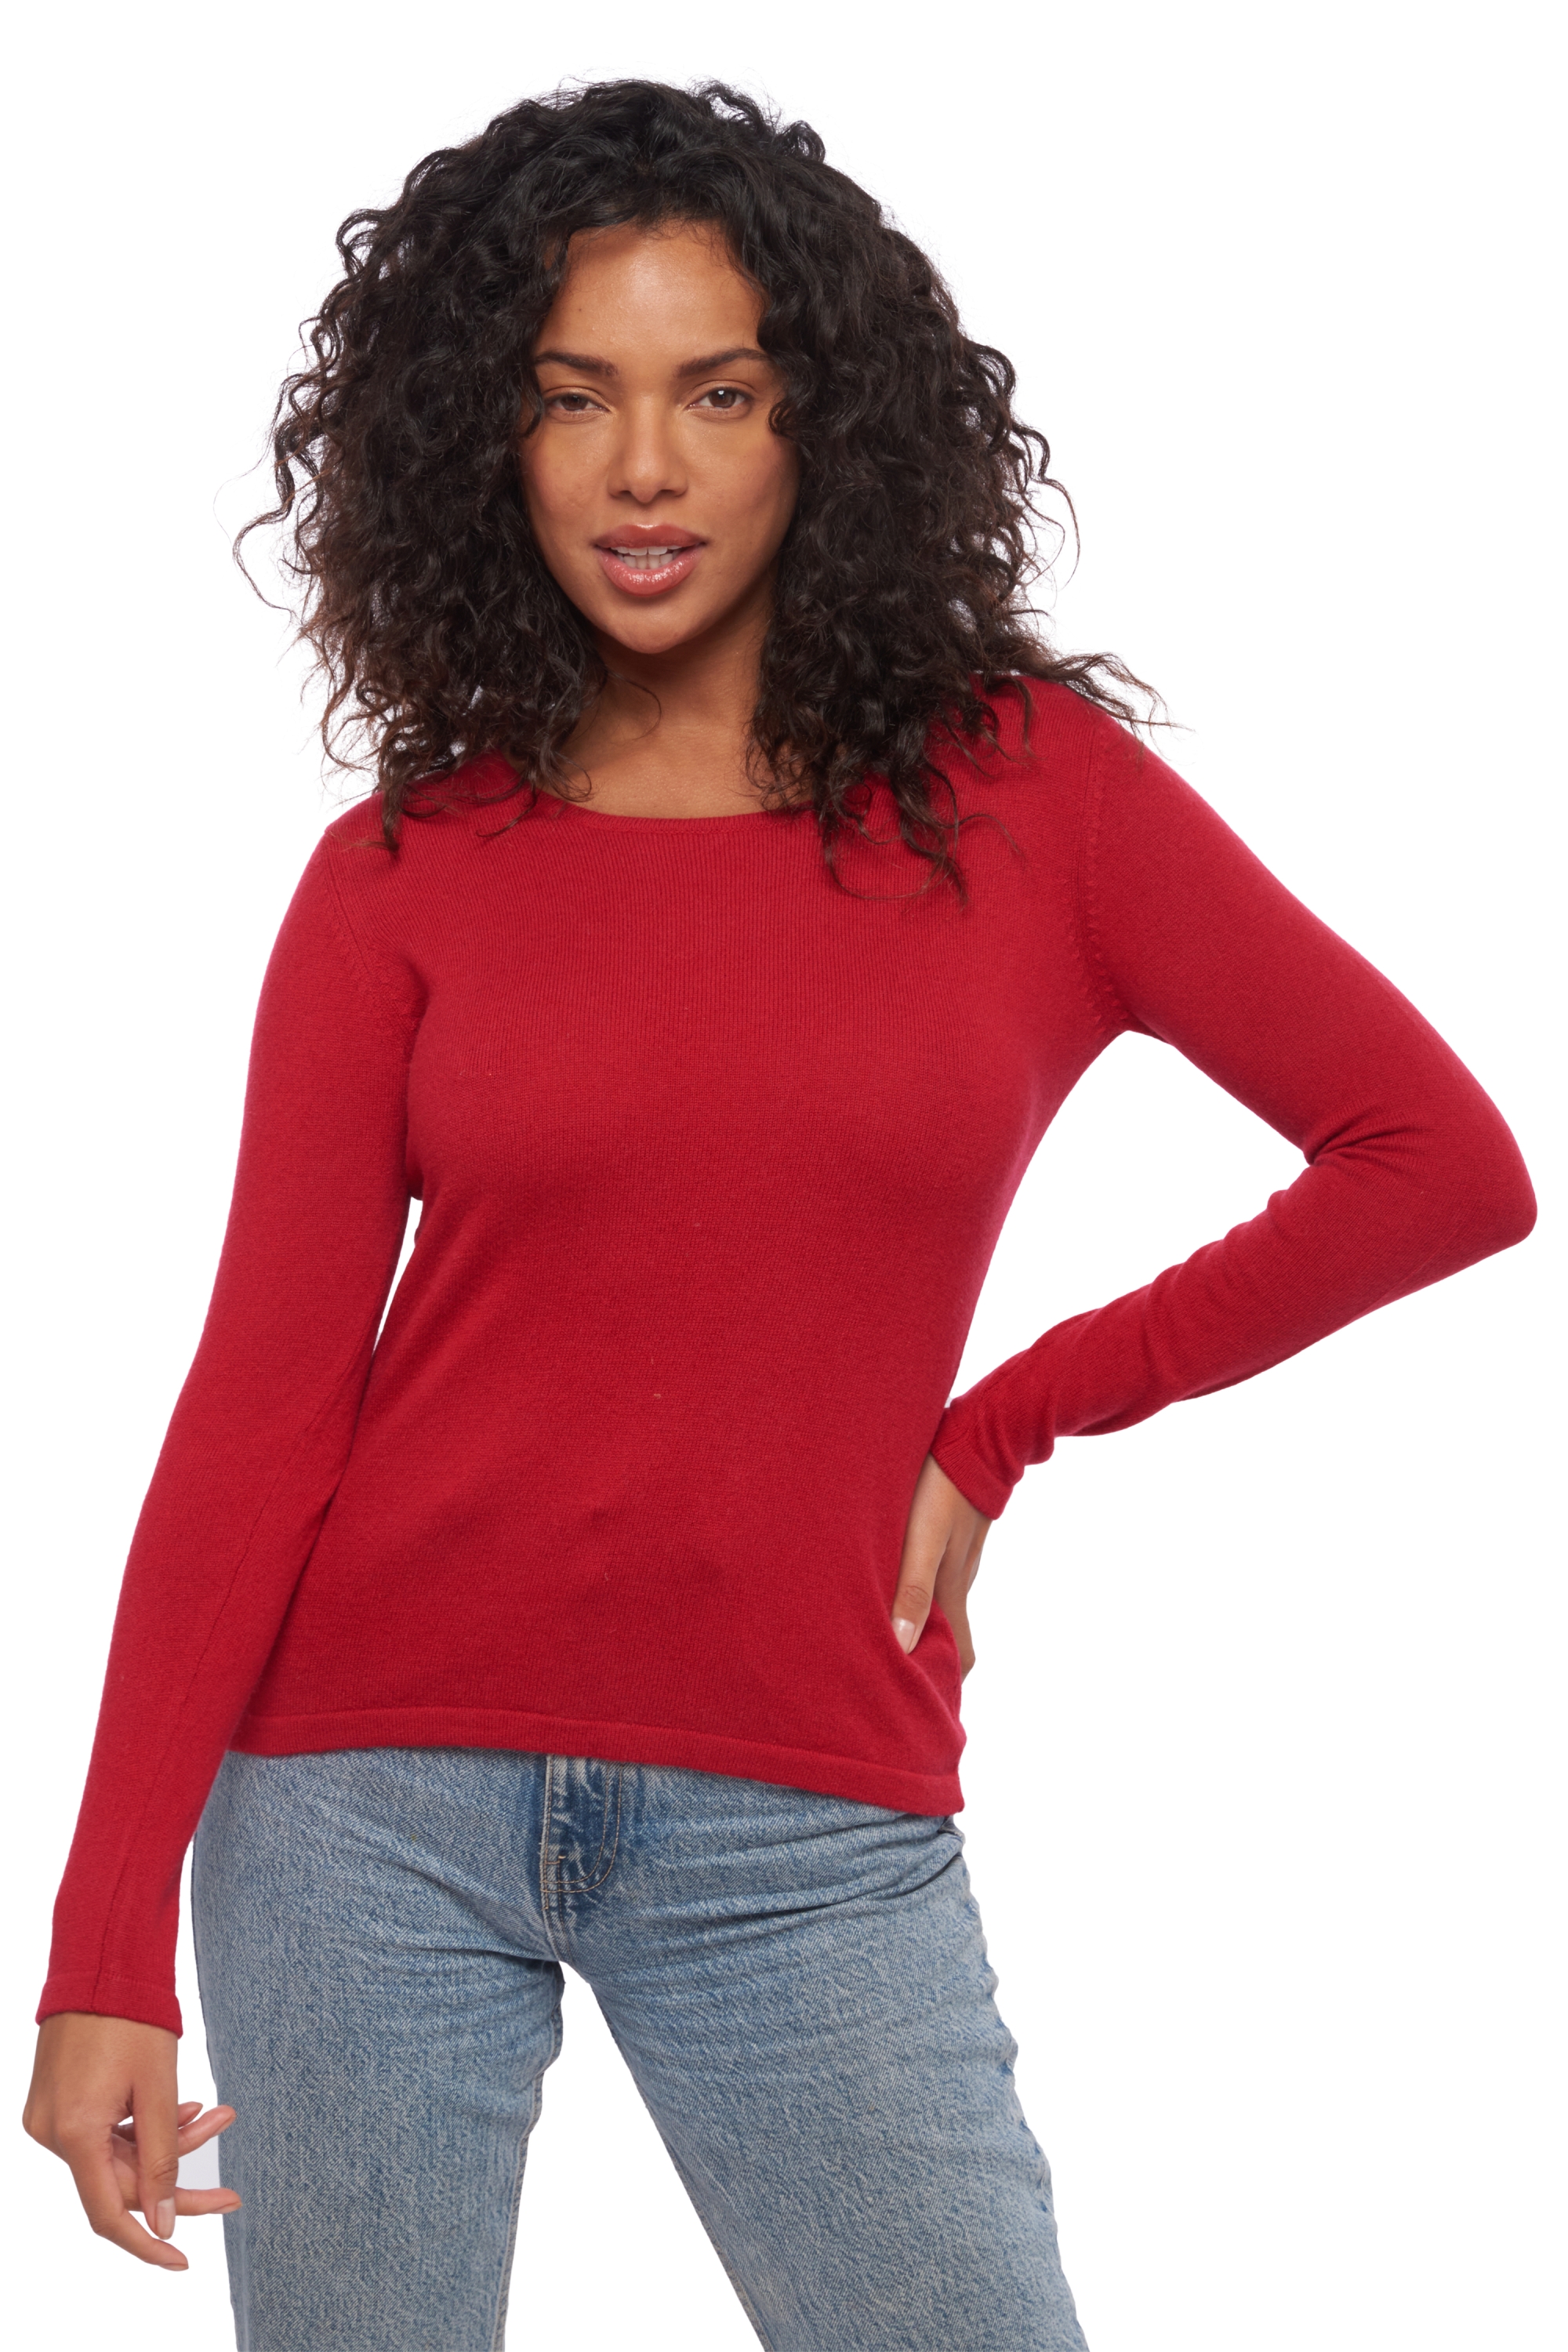 Cashmere ladies spring summer collection solange blood red m